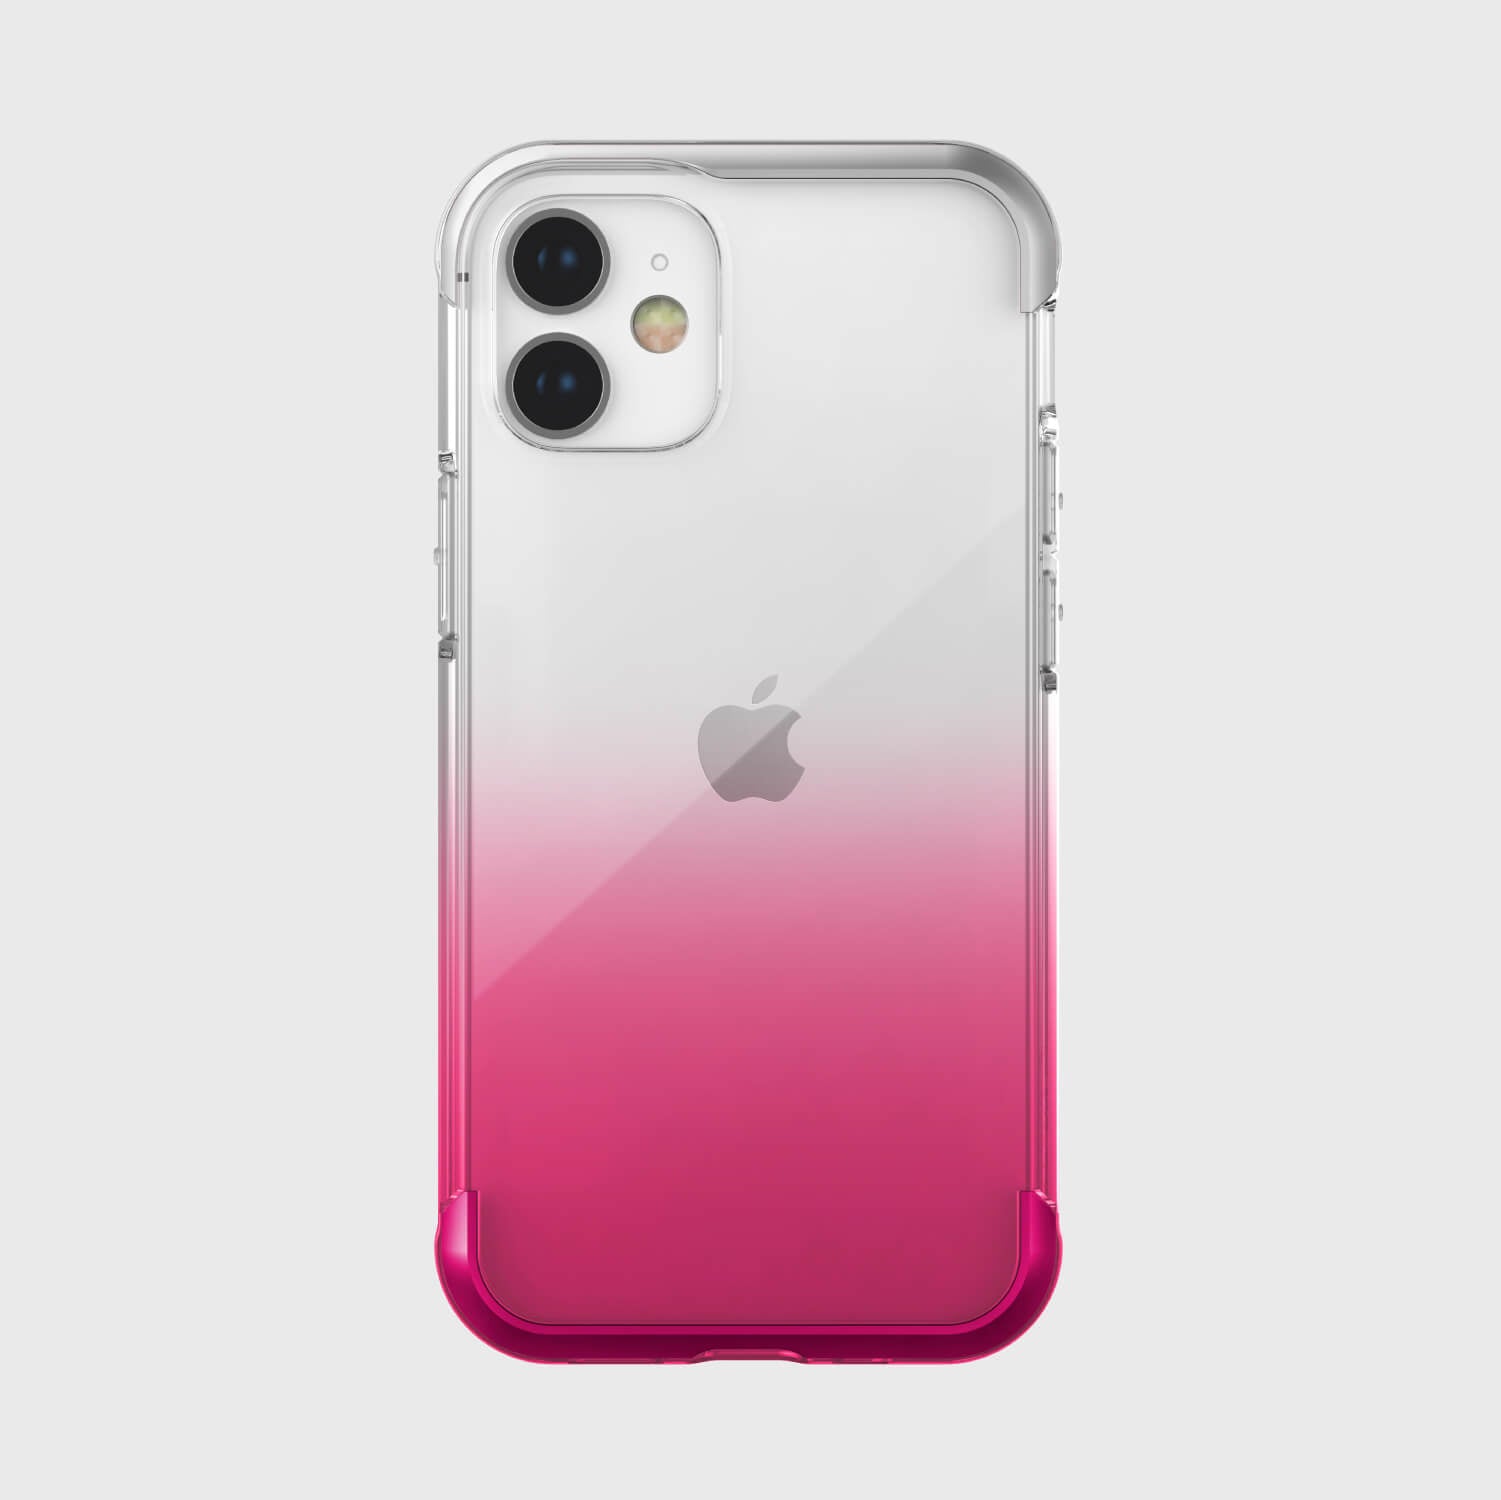 A drop protection iPhone 12 Mini case - Air in pink and white color option by Raptic.